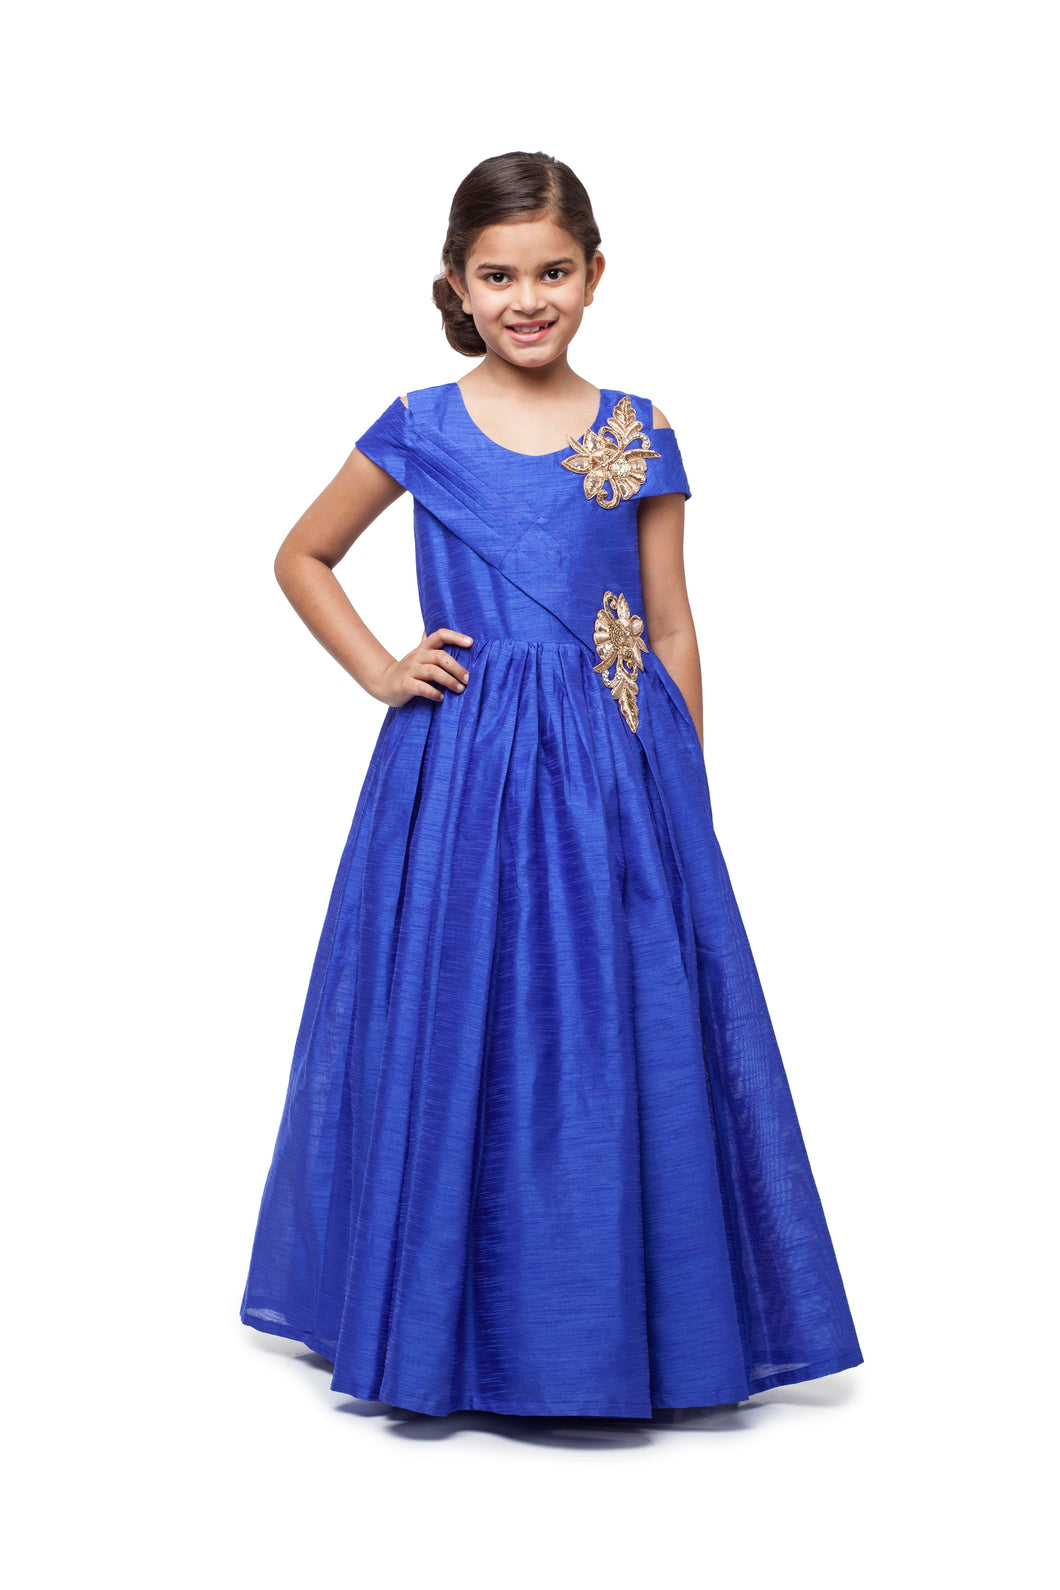 Girls Bright Ink Blue Gown